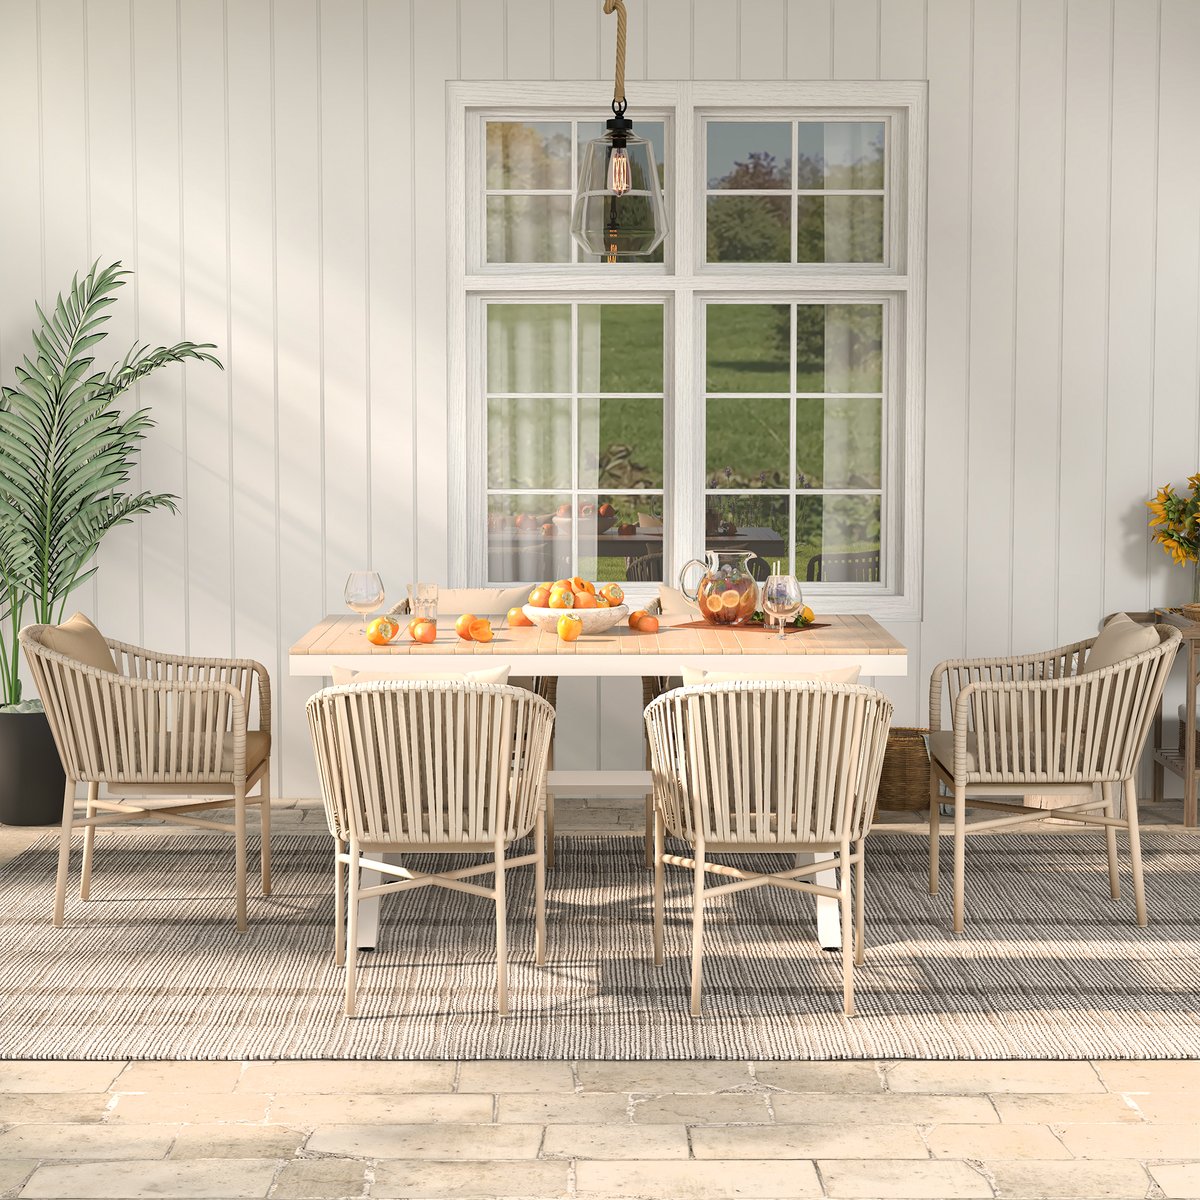 7 Pieces Outdoor Dining Set with Rectangle Table and Woven Rattan Armchair in Natural 59.1"W x 35.4"D x 29.5"H